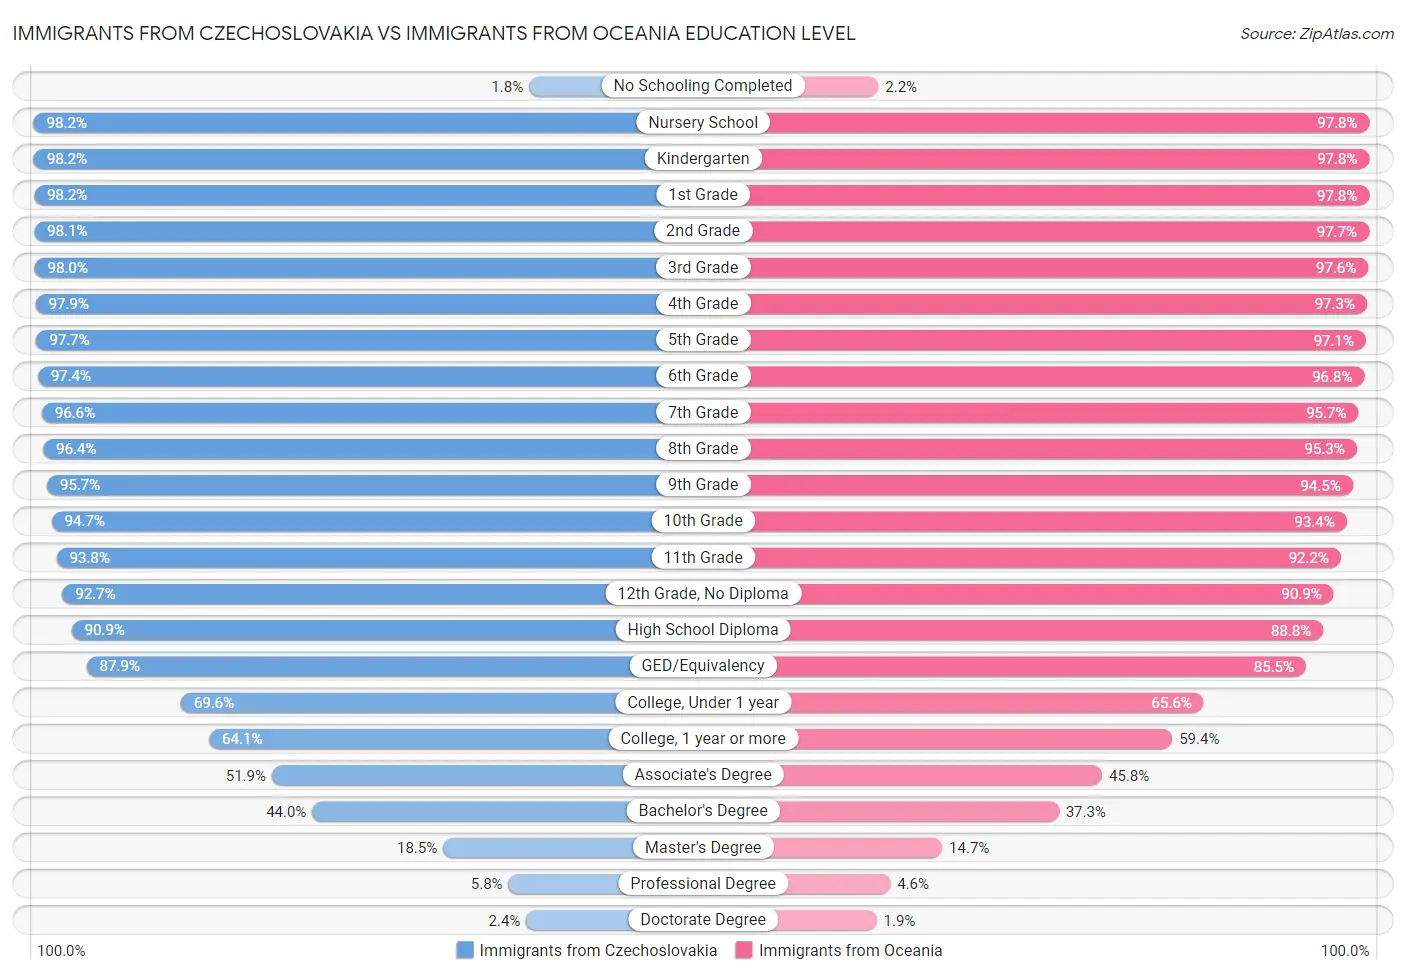 Immigrants from Czechoslovakia vs Immigrants from Oceania Education Level